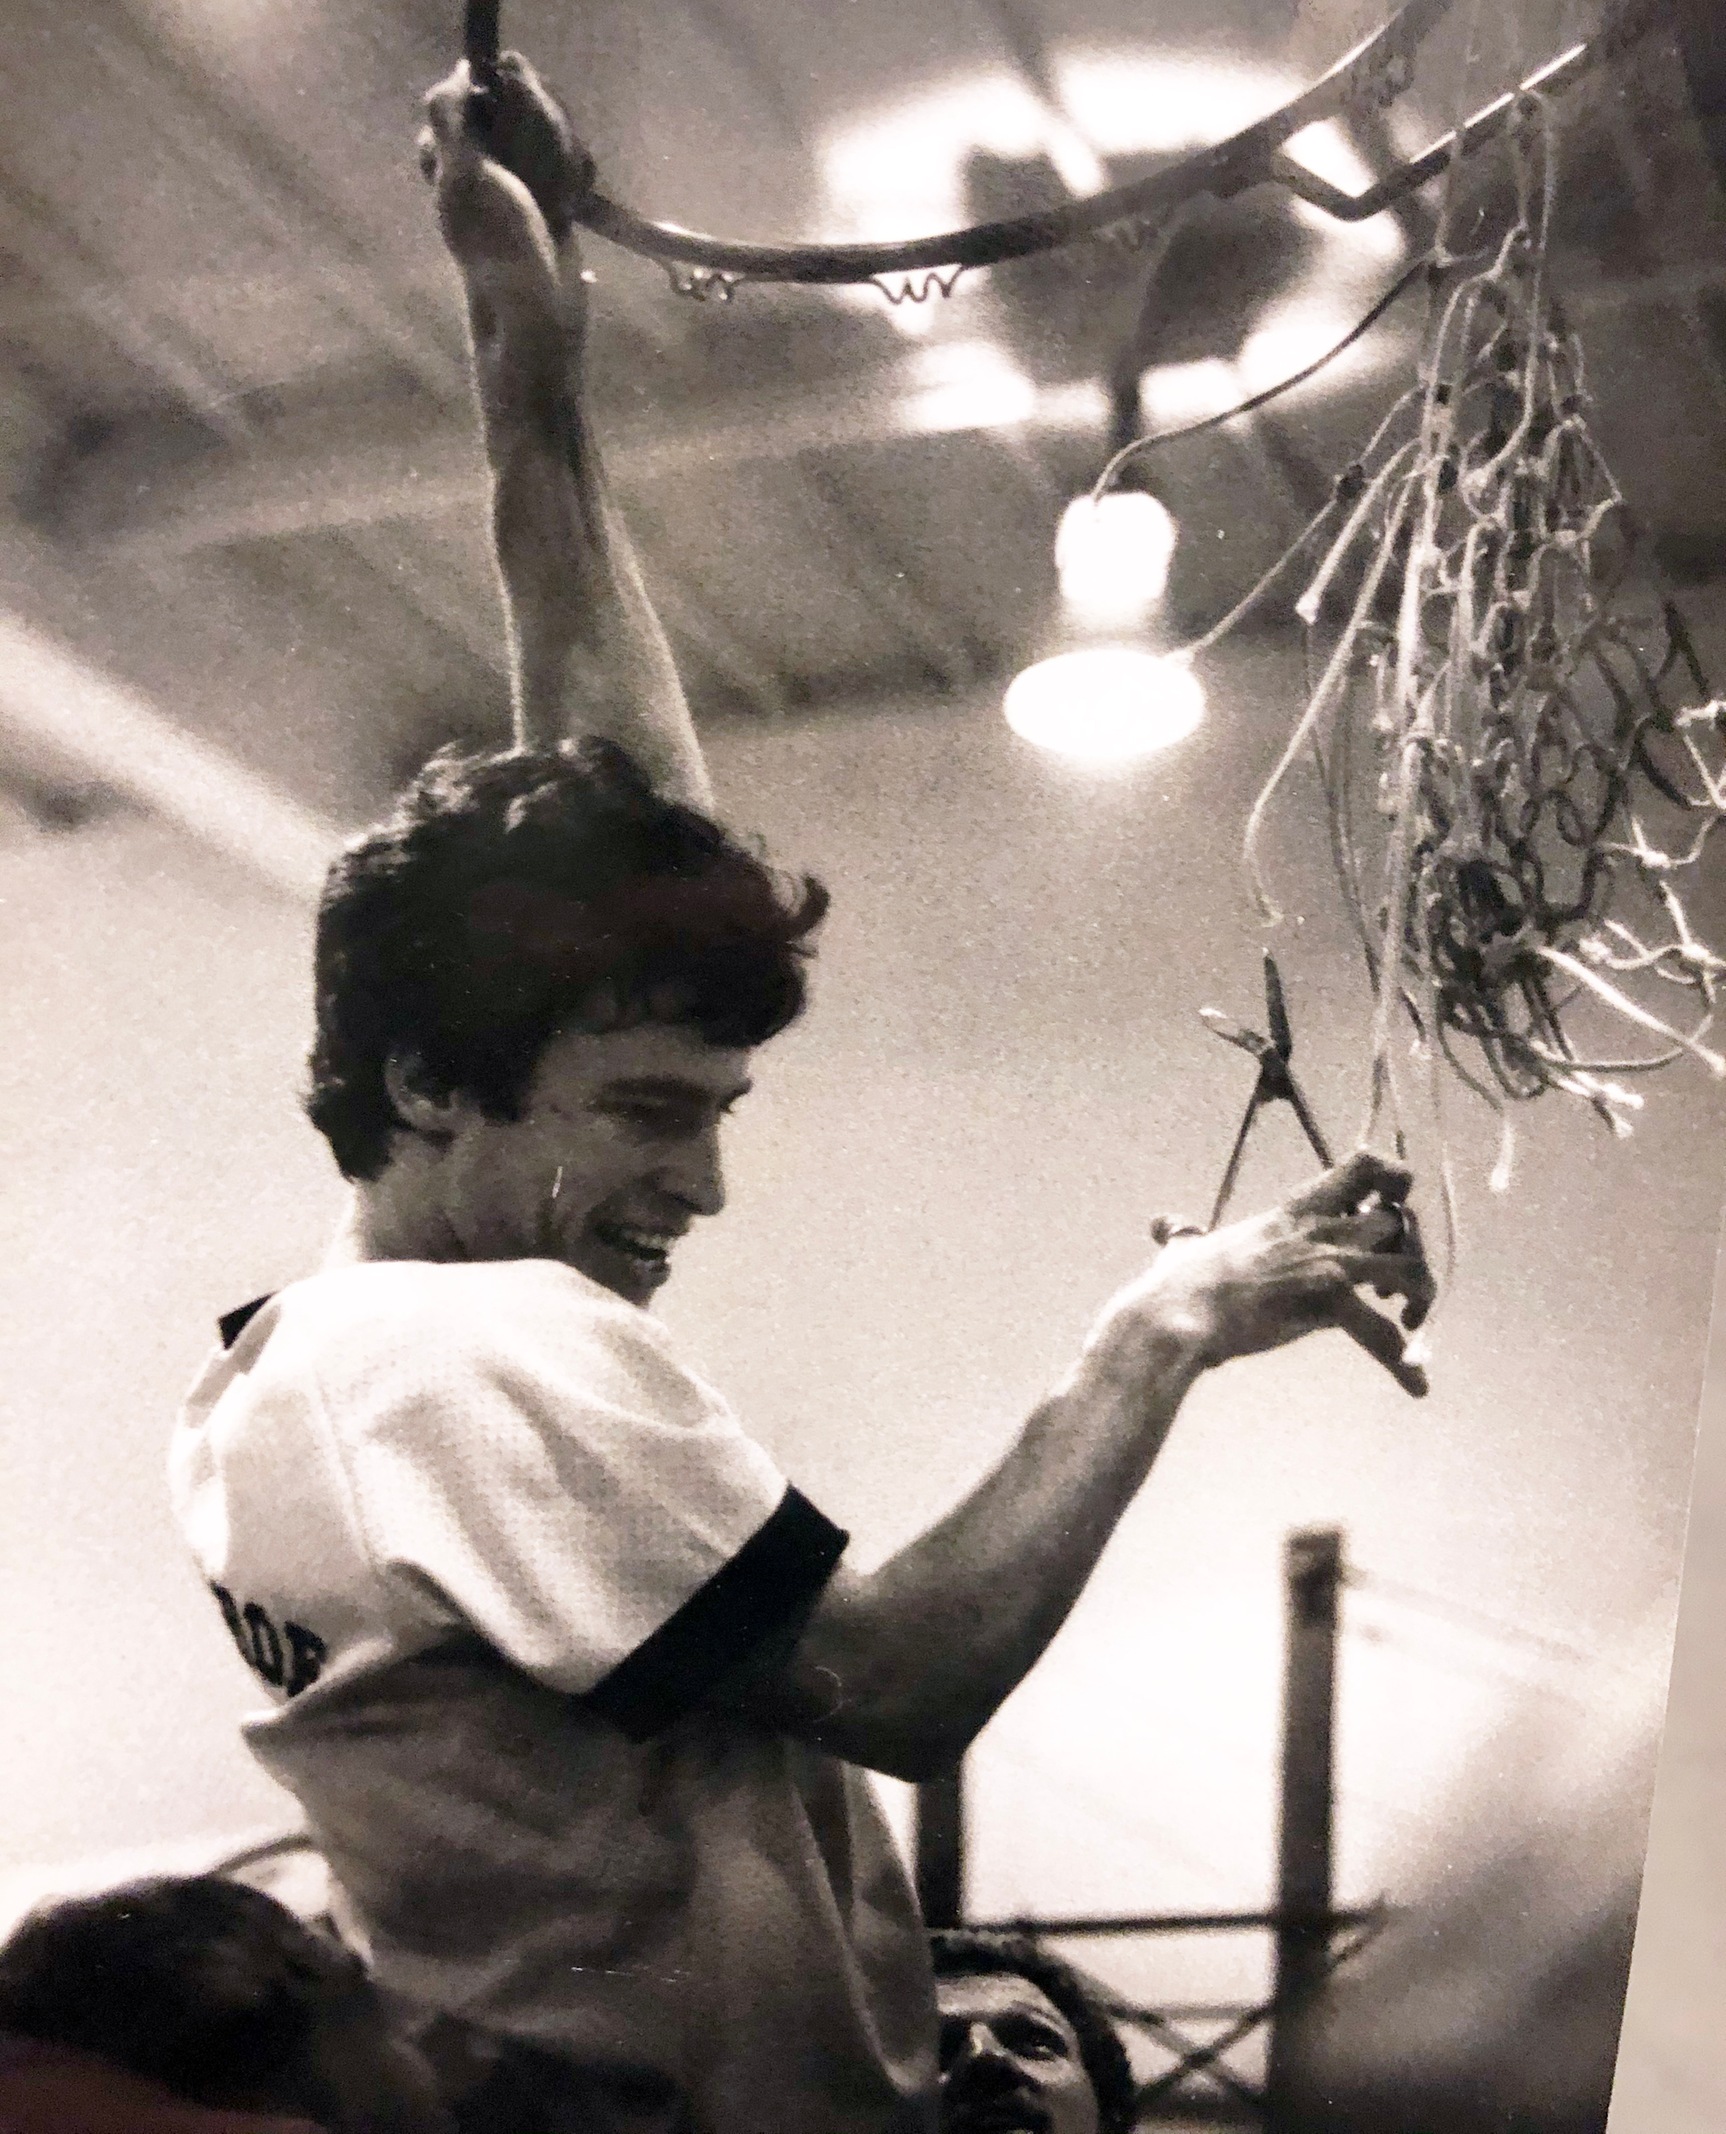 Dale Donohoe cutting down the net